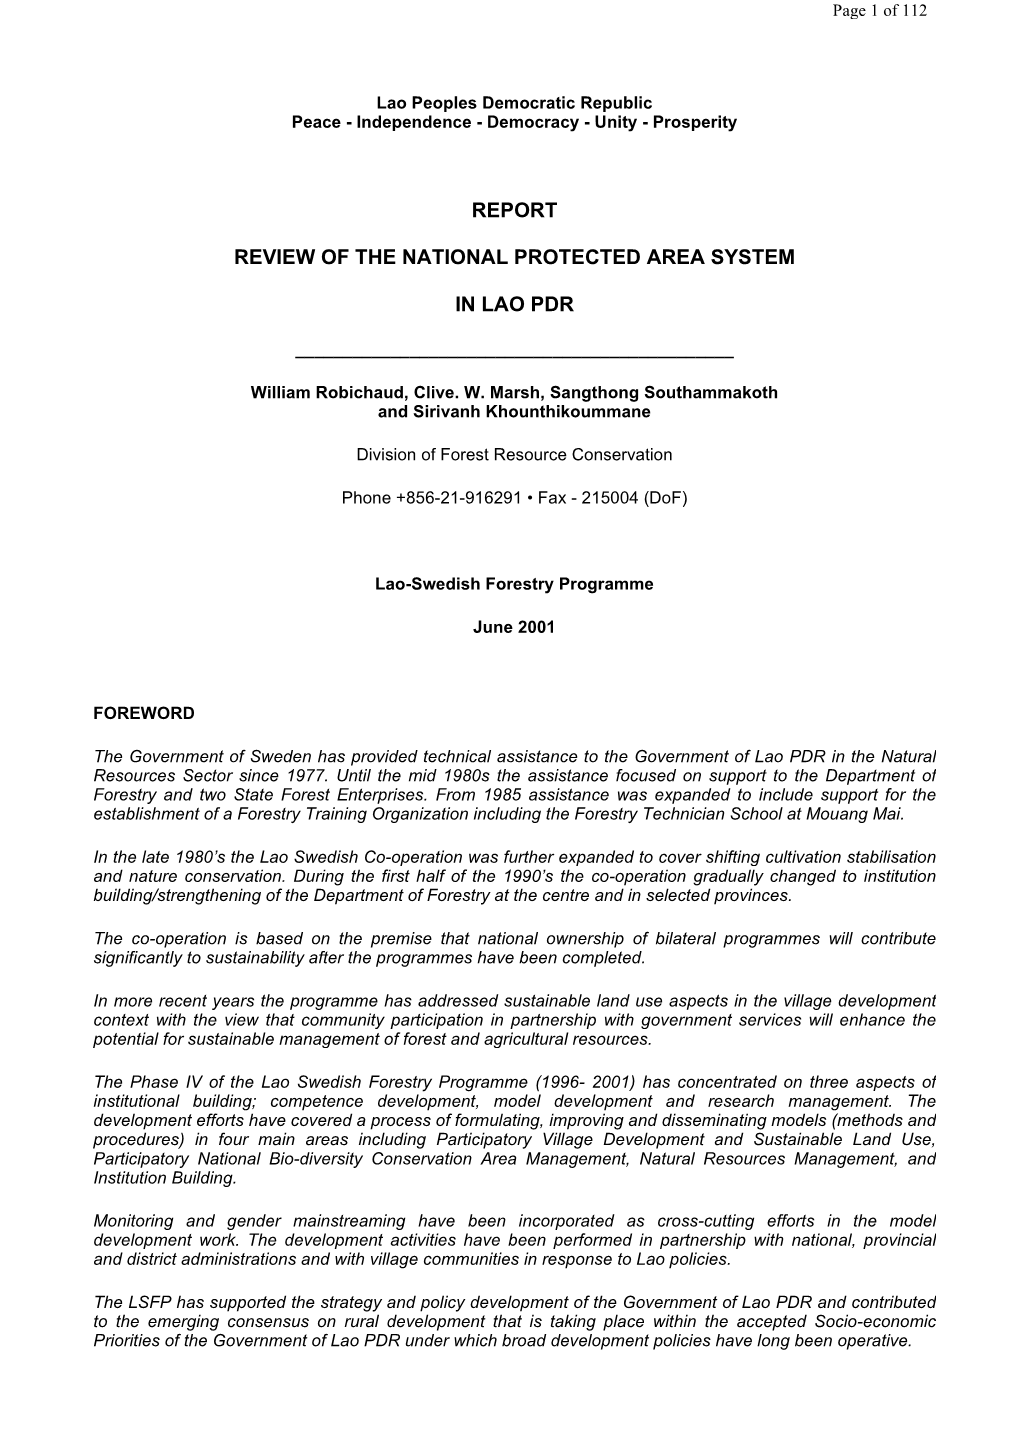 Report Review of the National Protected Area System In